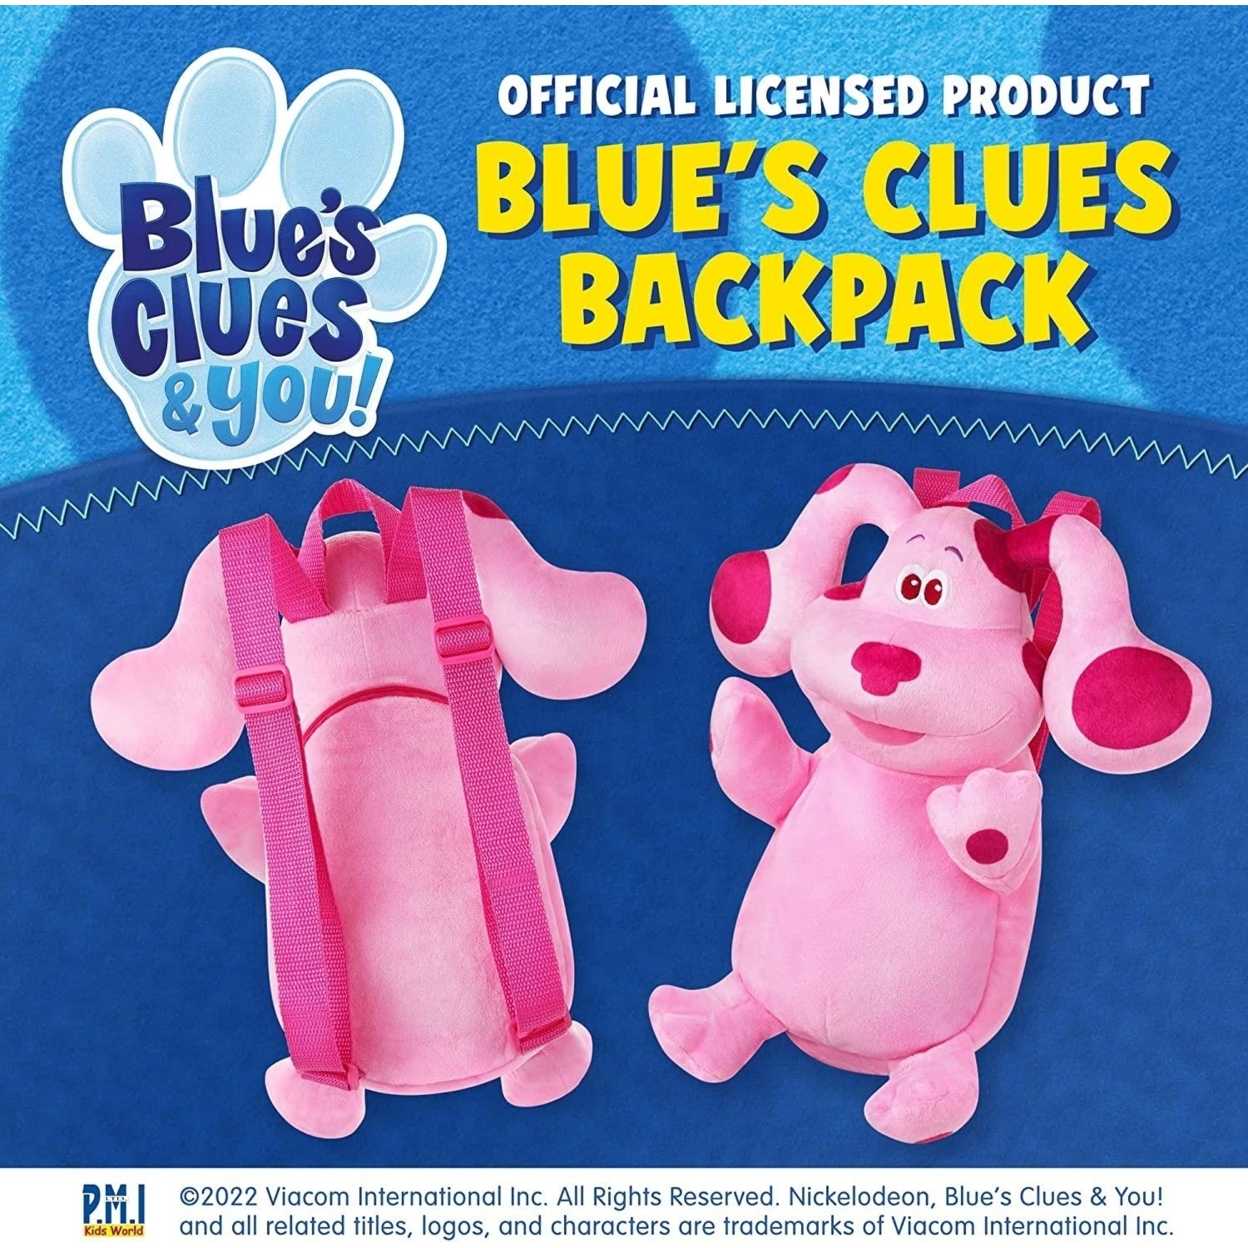 Blue's Clues Magenta Plush Dog Backpack Animated Character Nickelodeon Kids Show PMI International